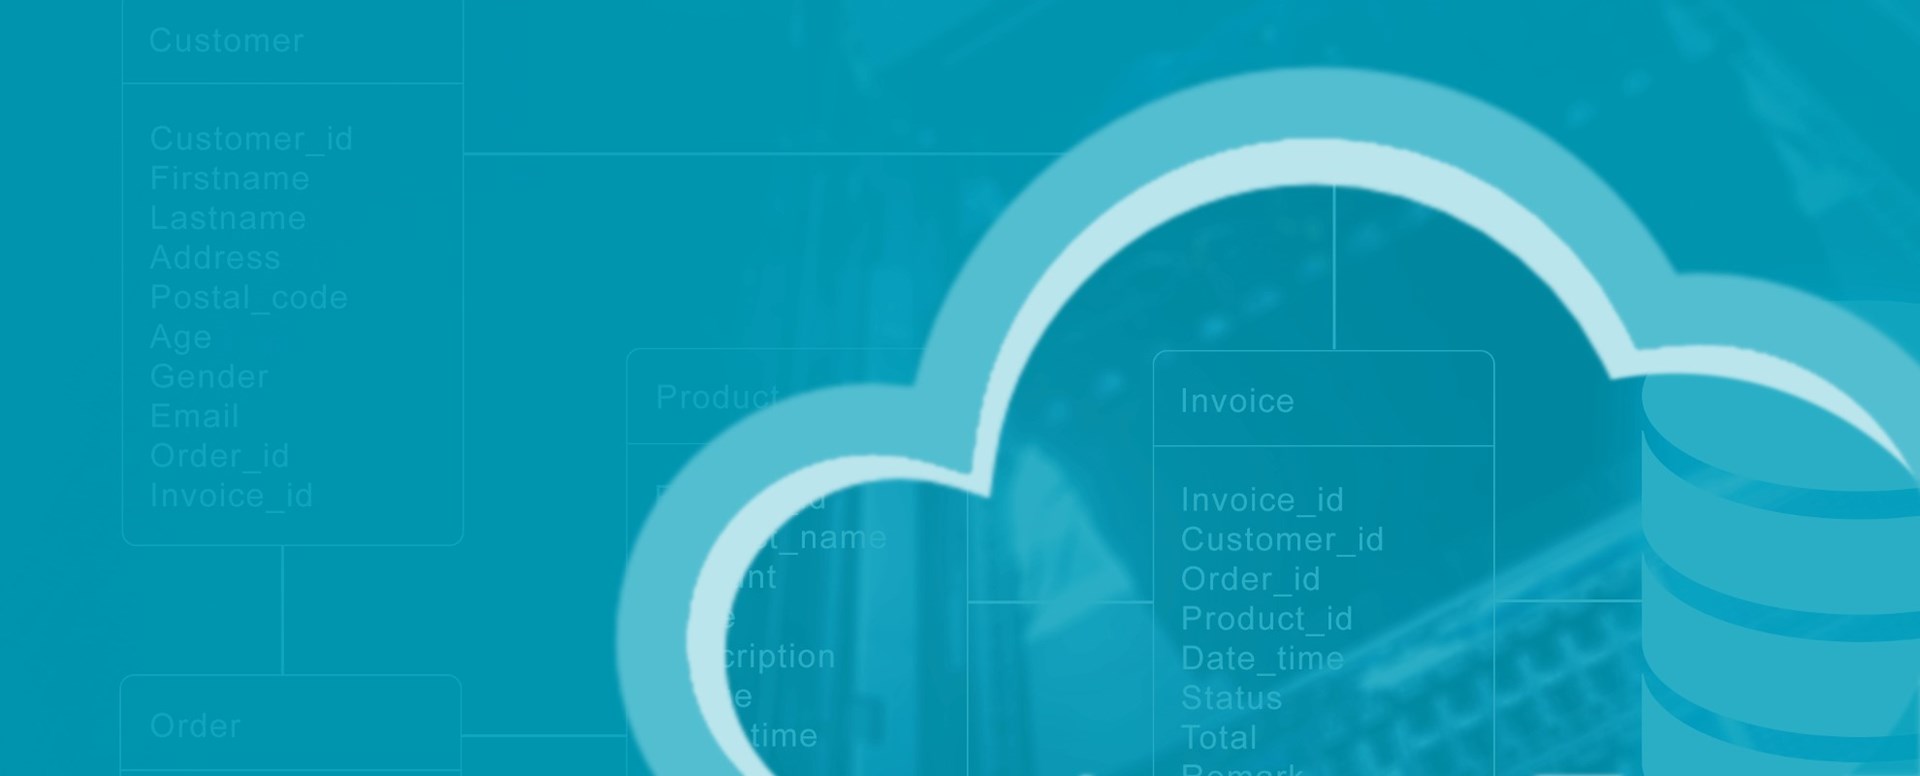 Cloud with turquoise background and technical words